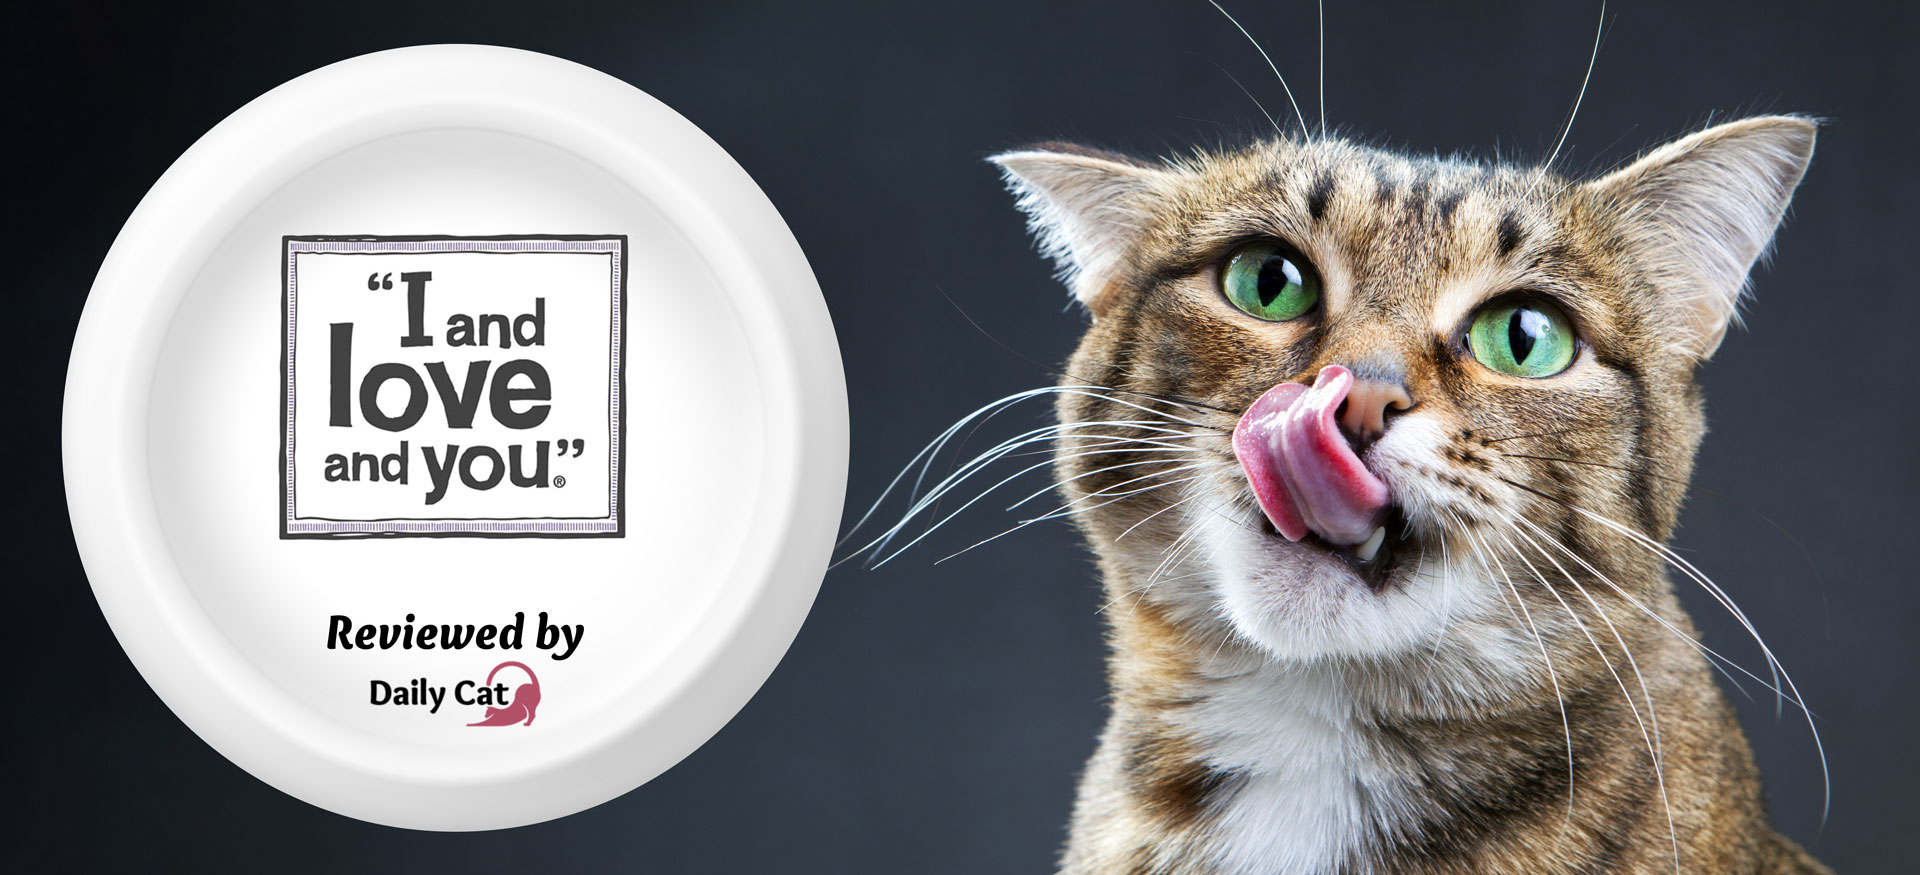 The Daily Cat-brand- I and Love and You Cat Food Review Graphic